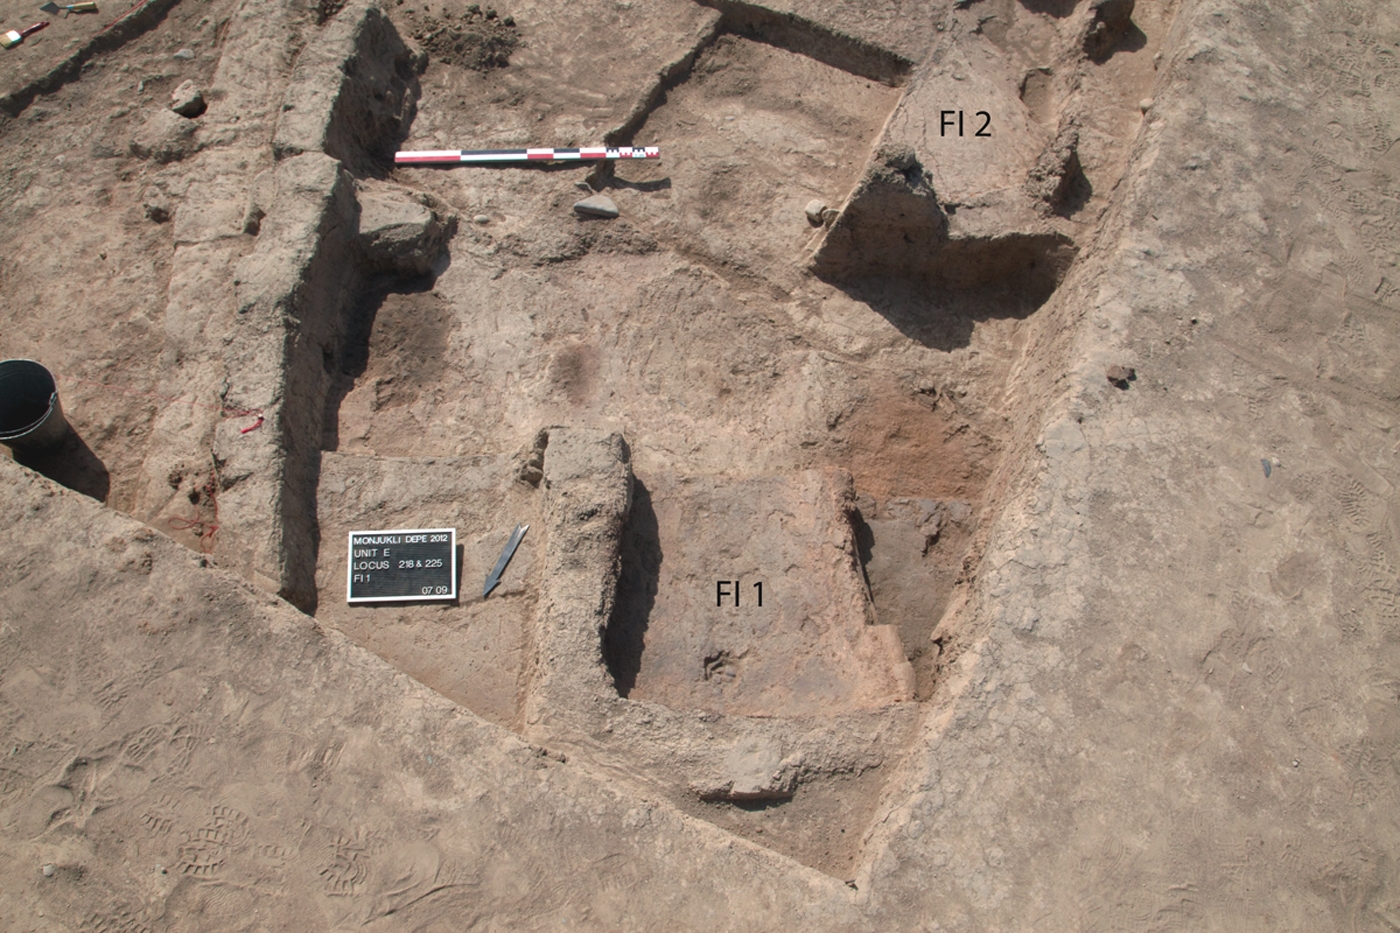 Two ovens, FI 1 and 2, located to the north of House 2. FI 1 is a double-chambered oven, one chamber of which lay partly outside the excavation area. FI 2 consisted of a single-chambered oven.